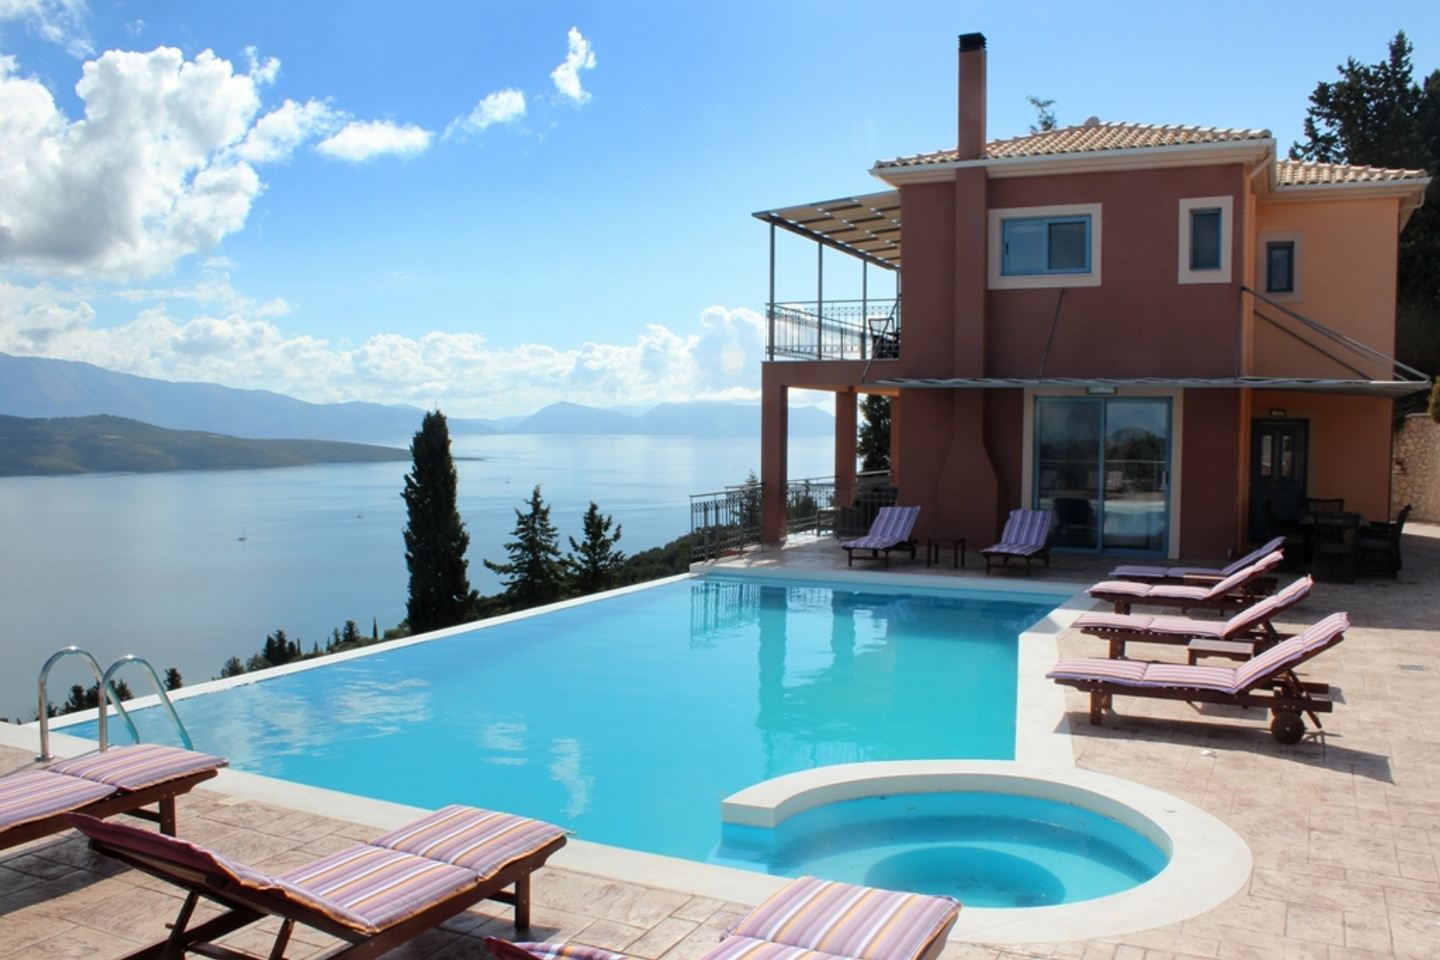 Pilates and Wellness Retreat in Greece